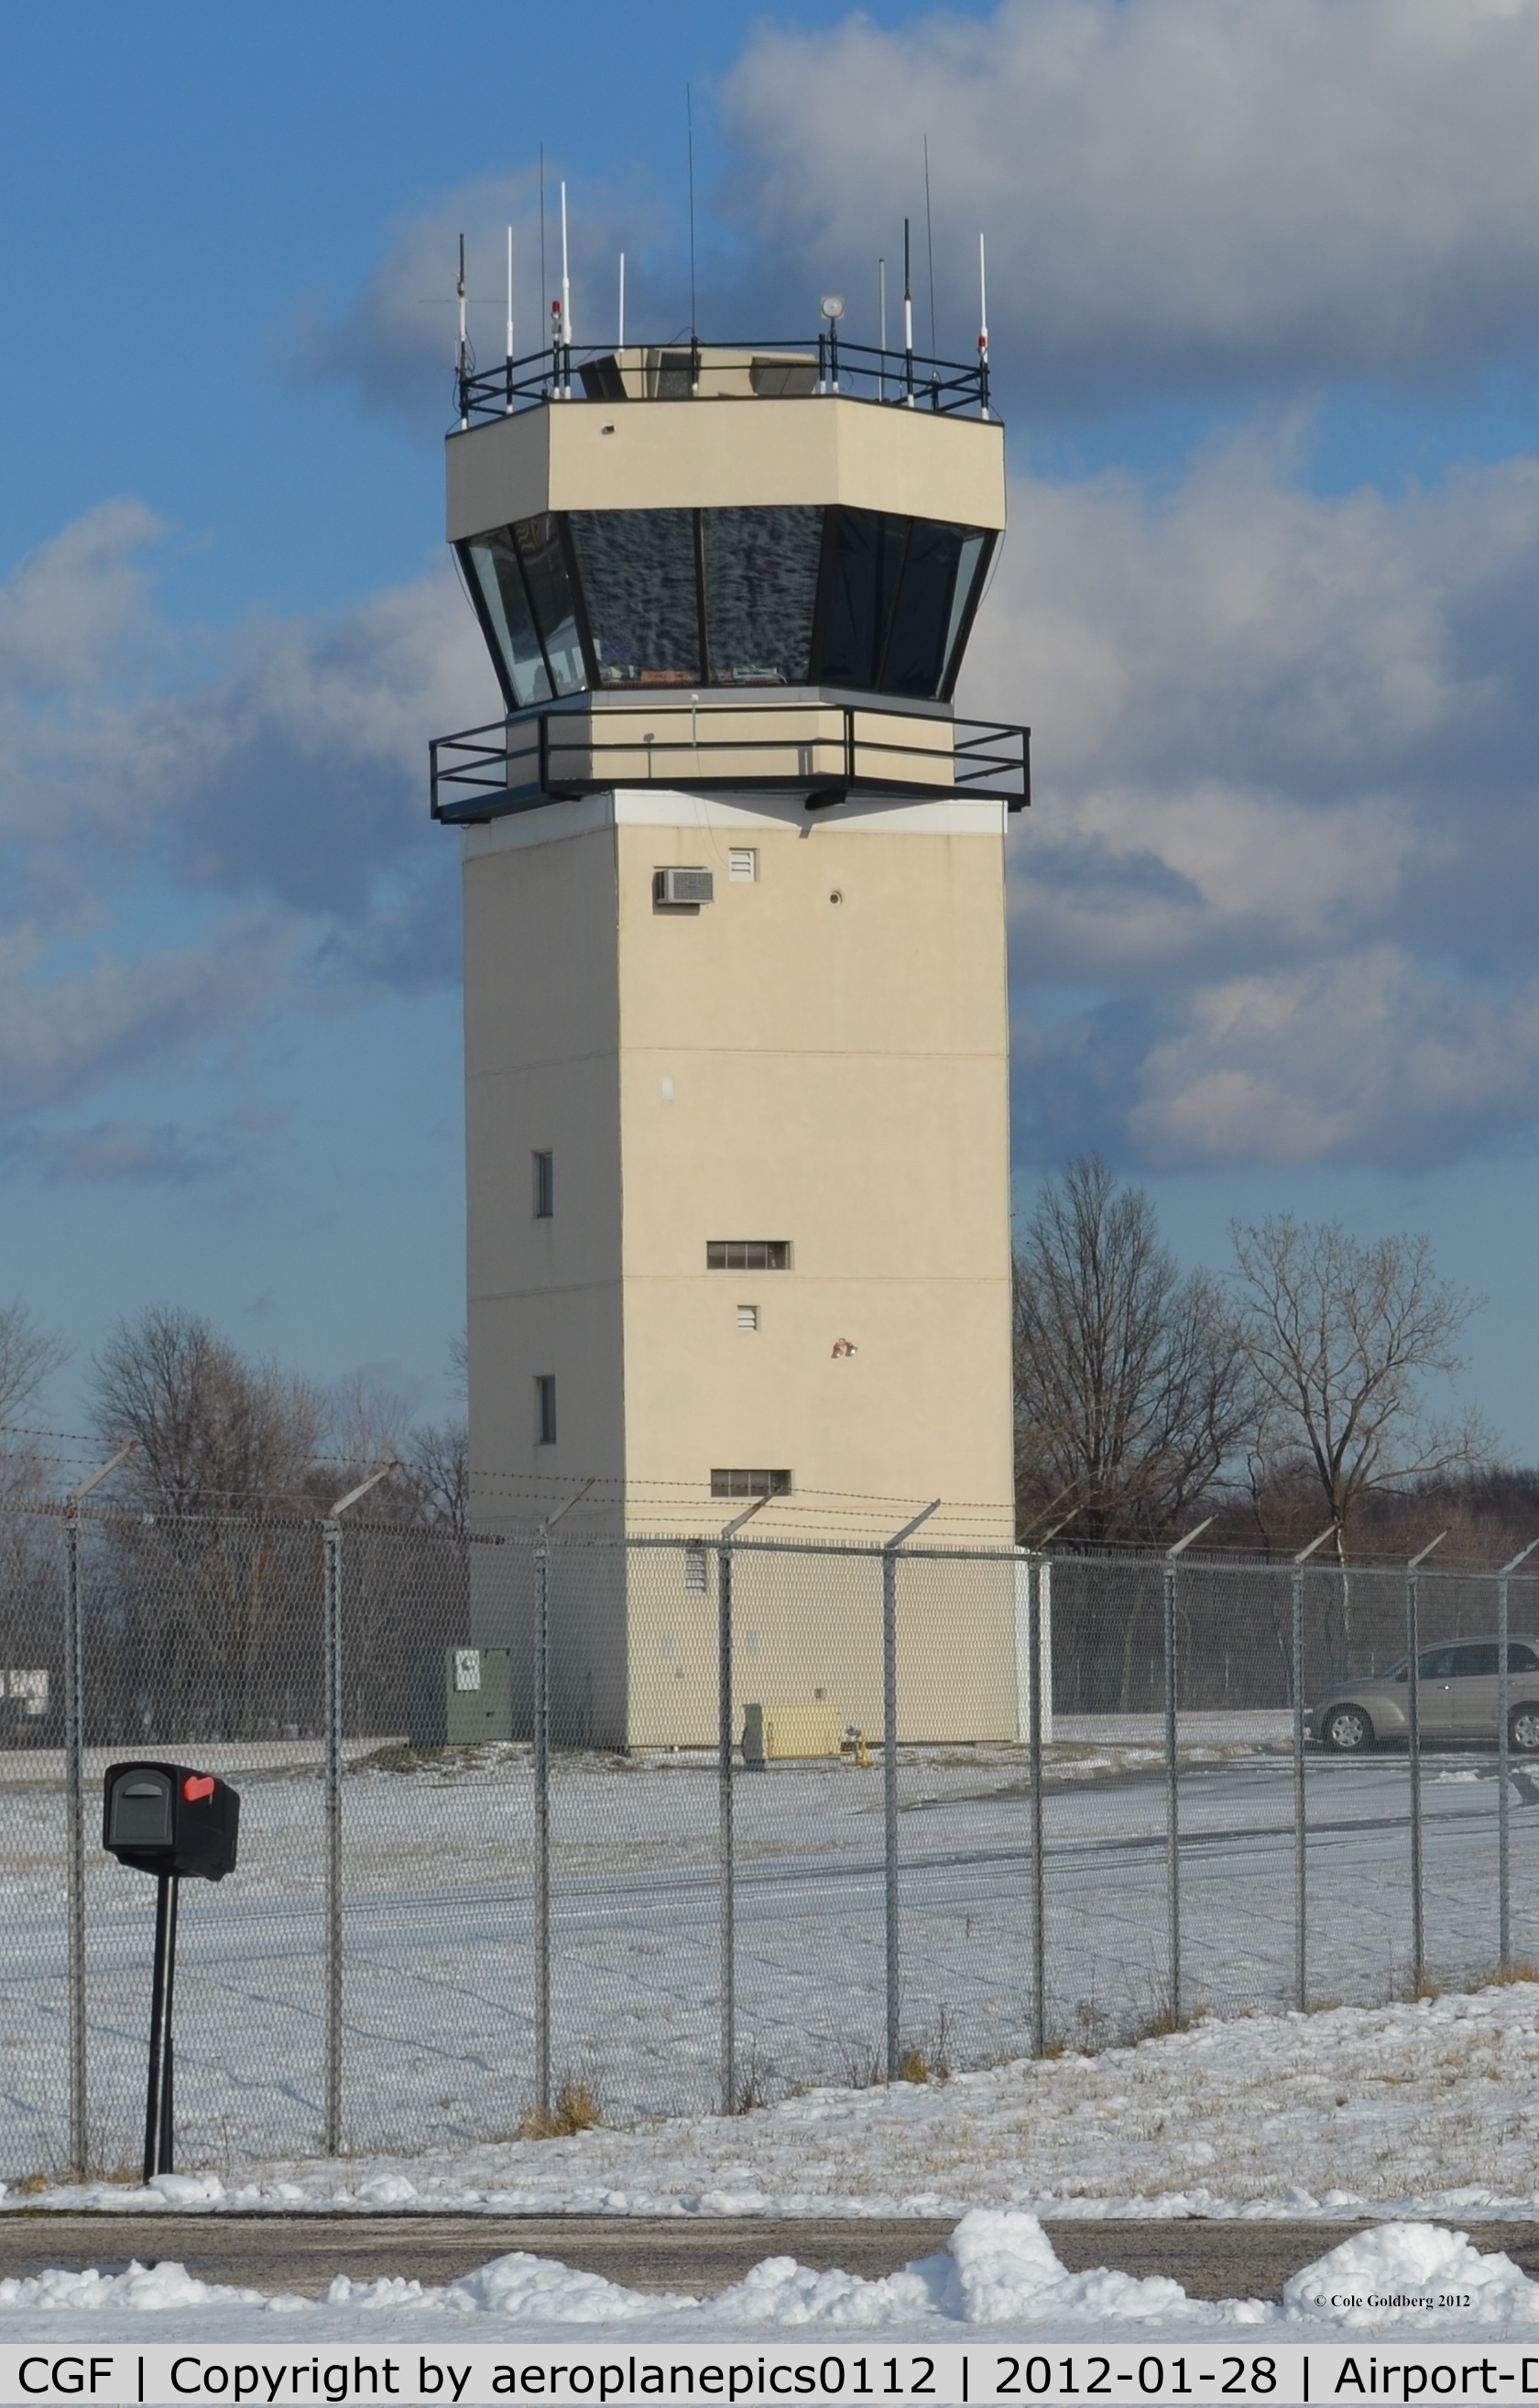 Cuyahoga County Airport (CGF) - The Air Traffic Control Tower at KCGF, a public airport located in Cleveland, Ohio. It is also known as the Robert D Shea Field.